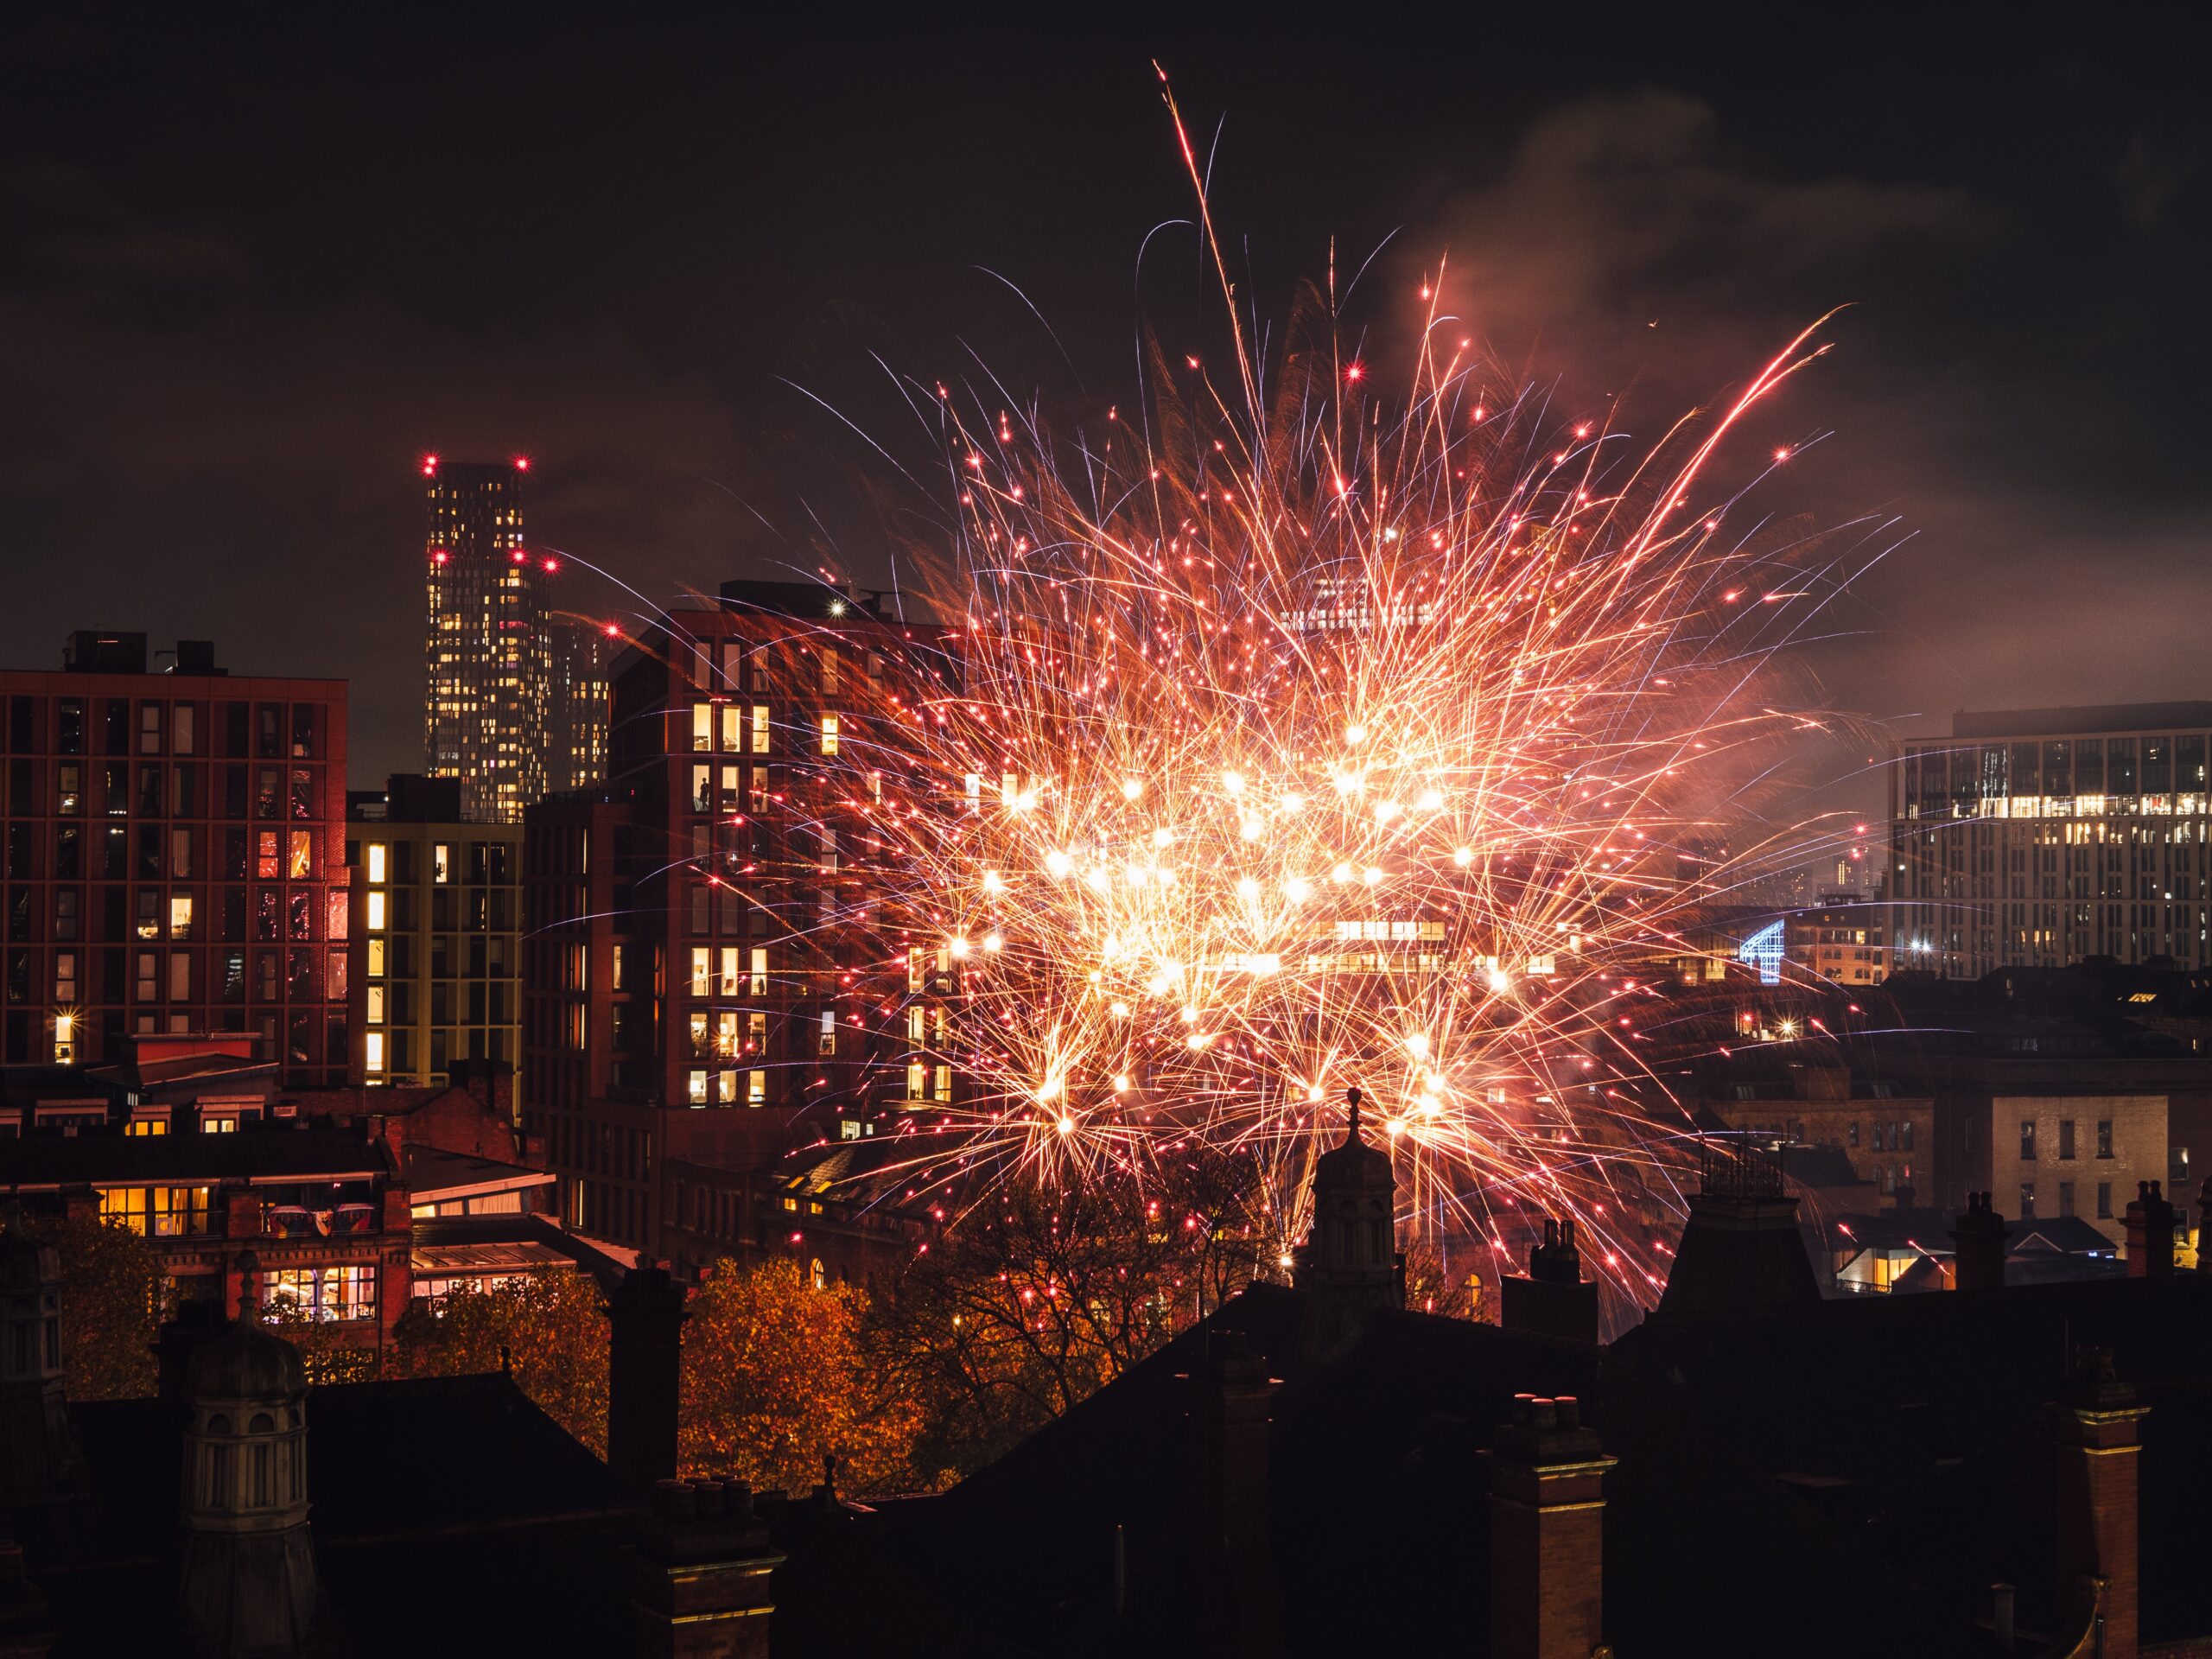 An unofficial fireworks display in Manchester in previous years.